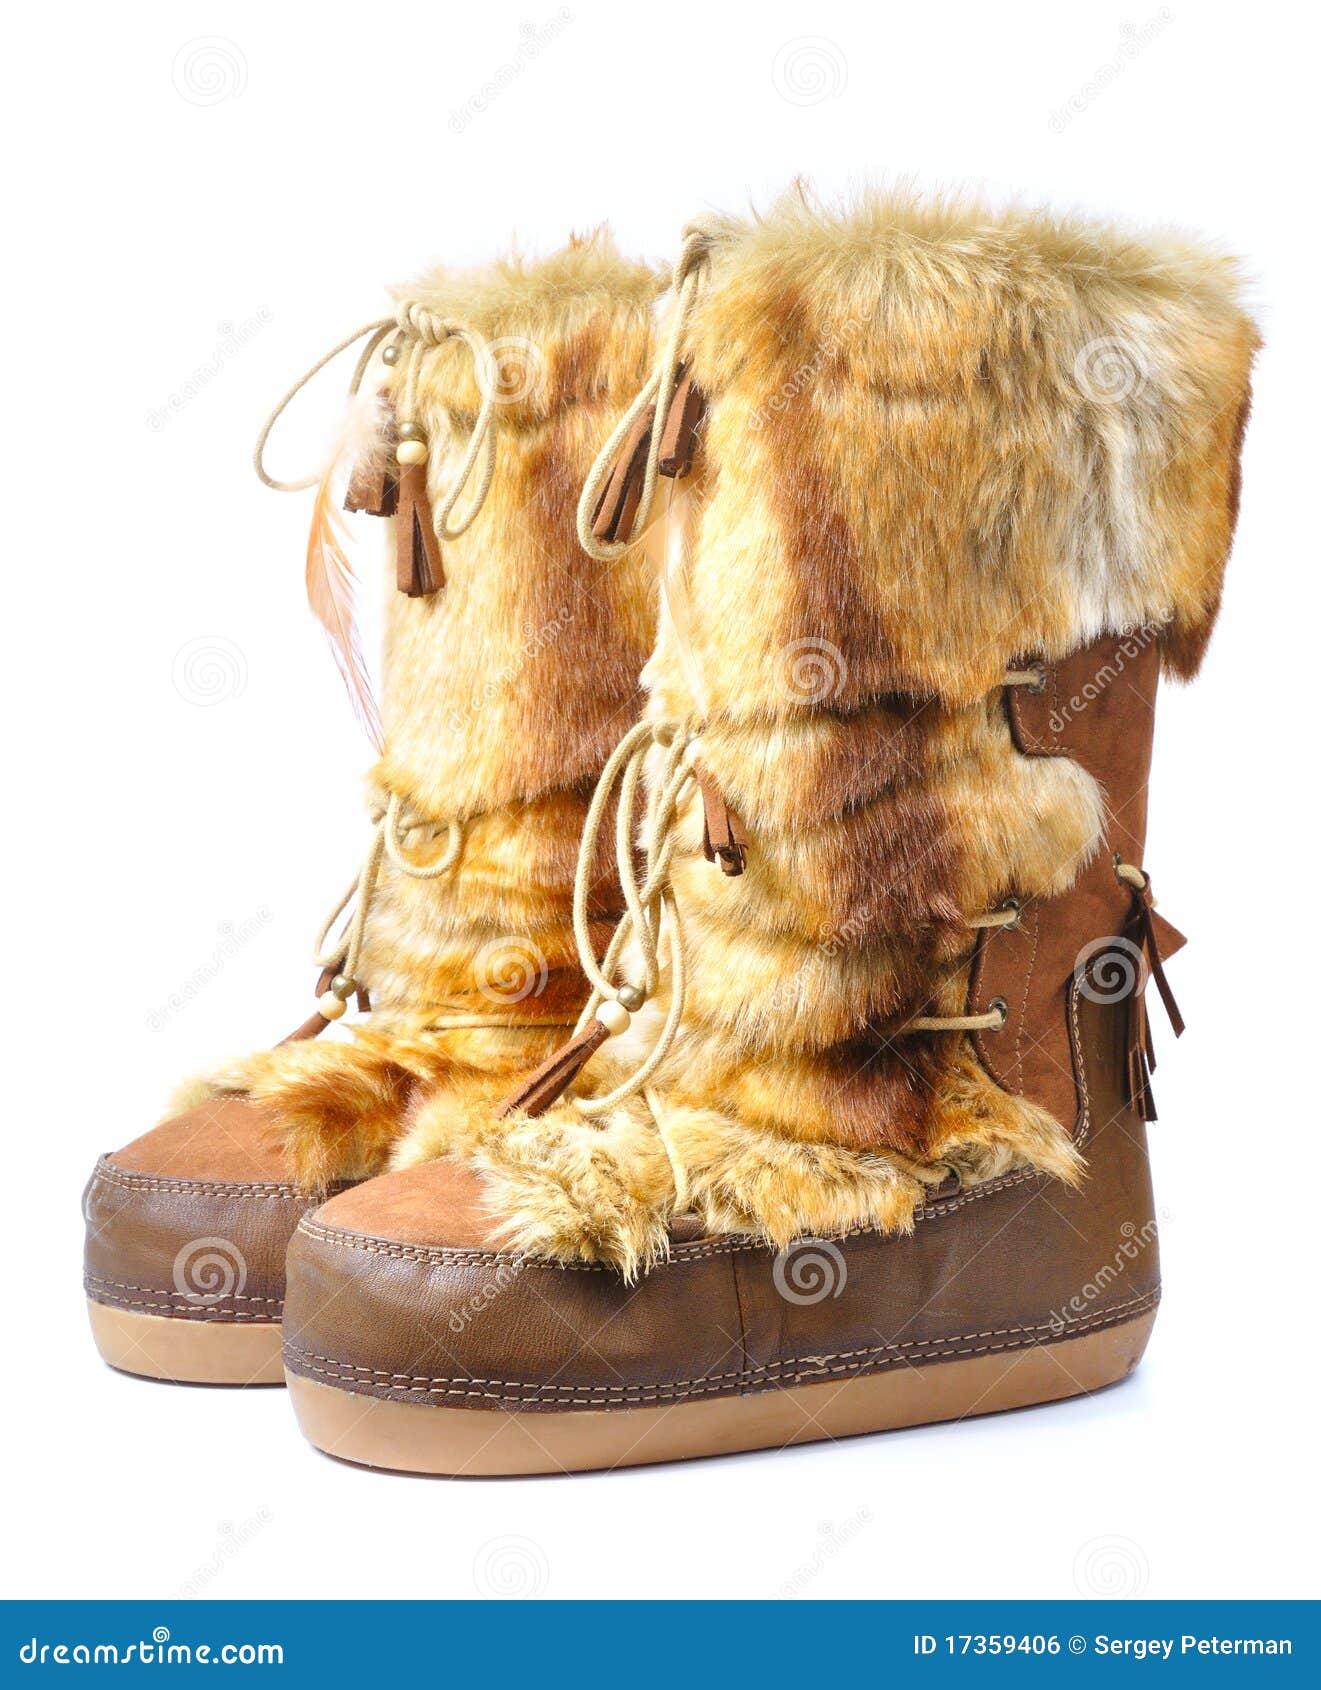 Furry winter boots stock photo. Image of unisex, cutout - 17359406